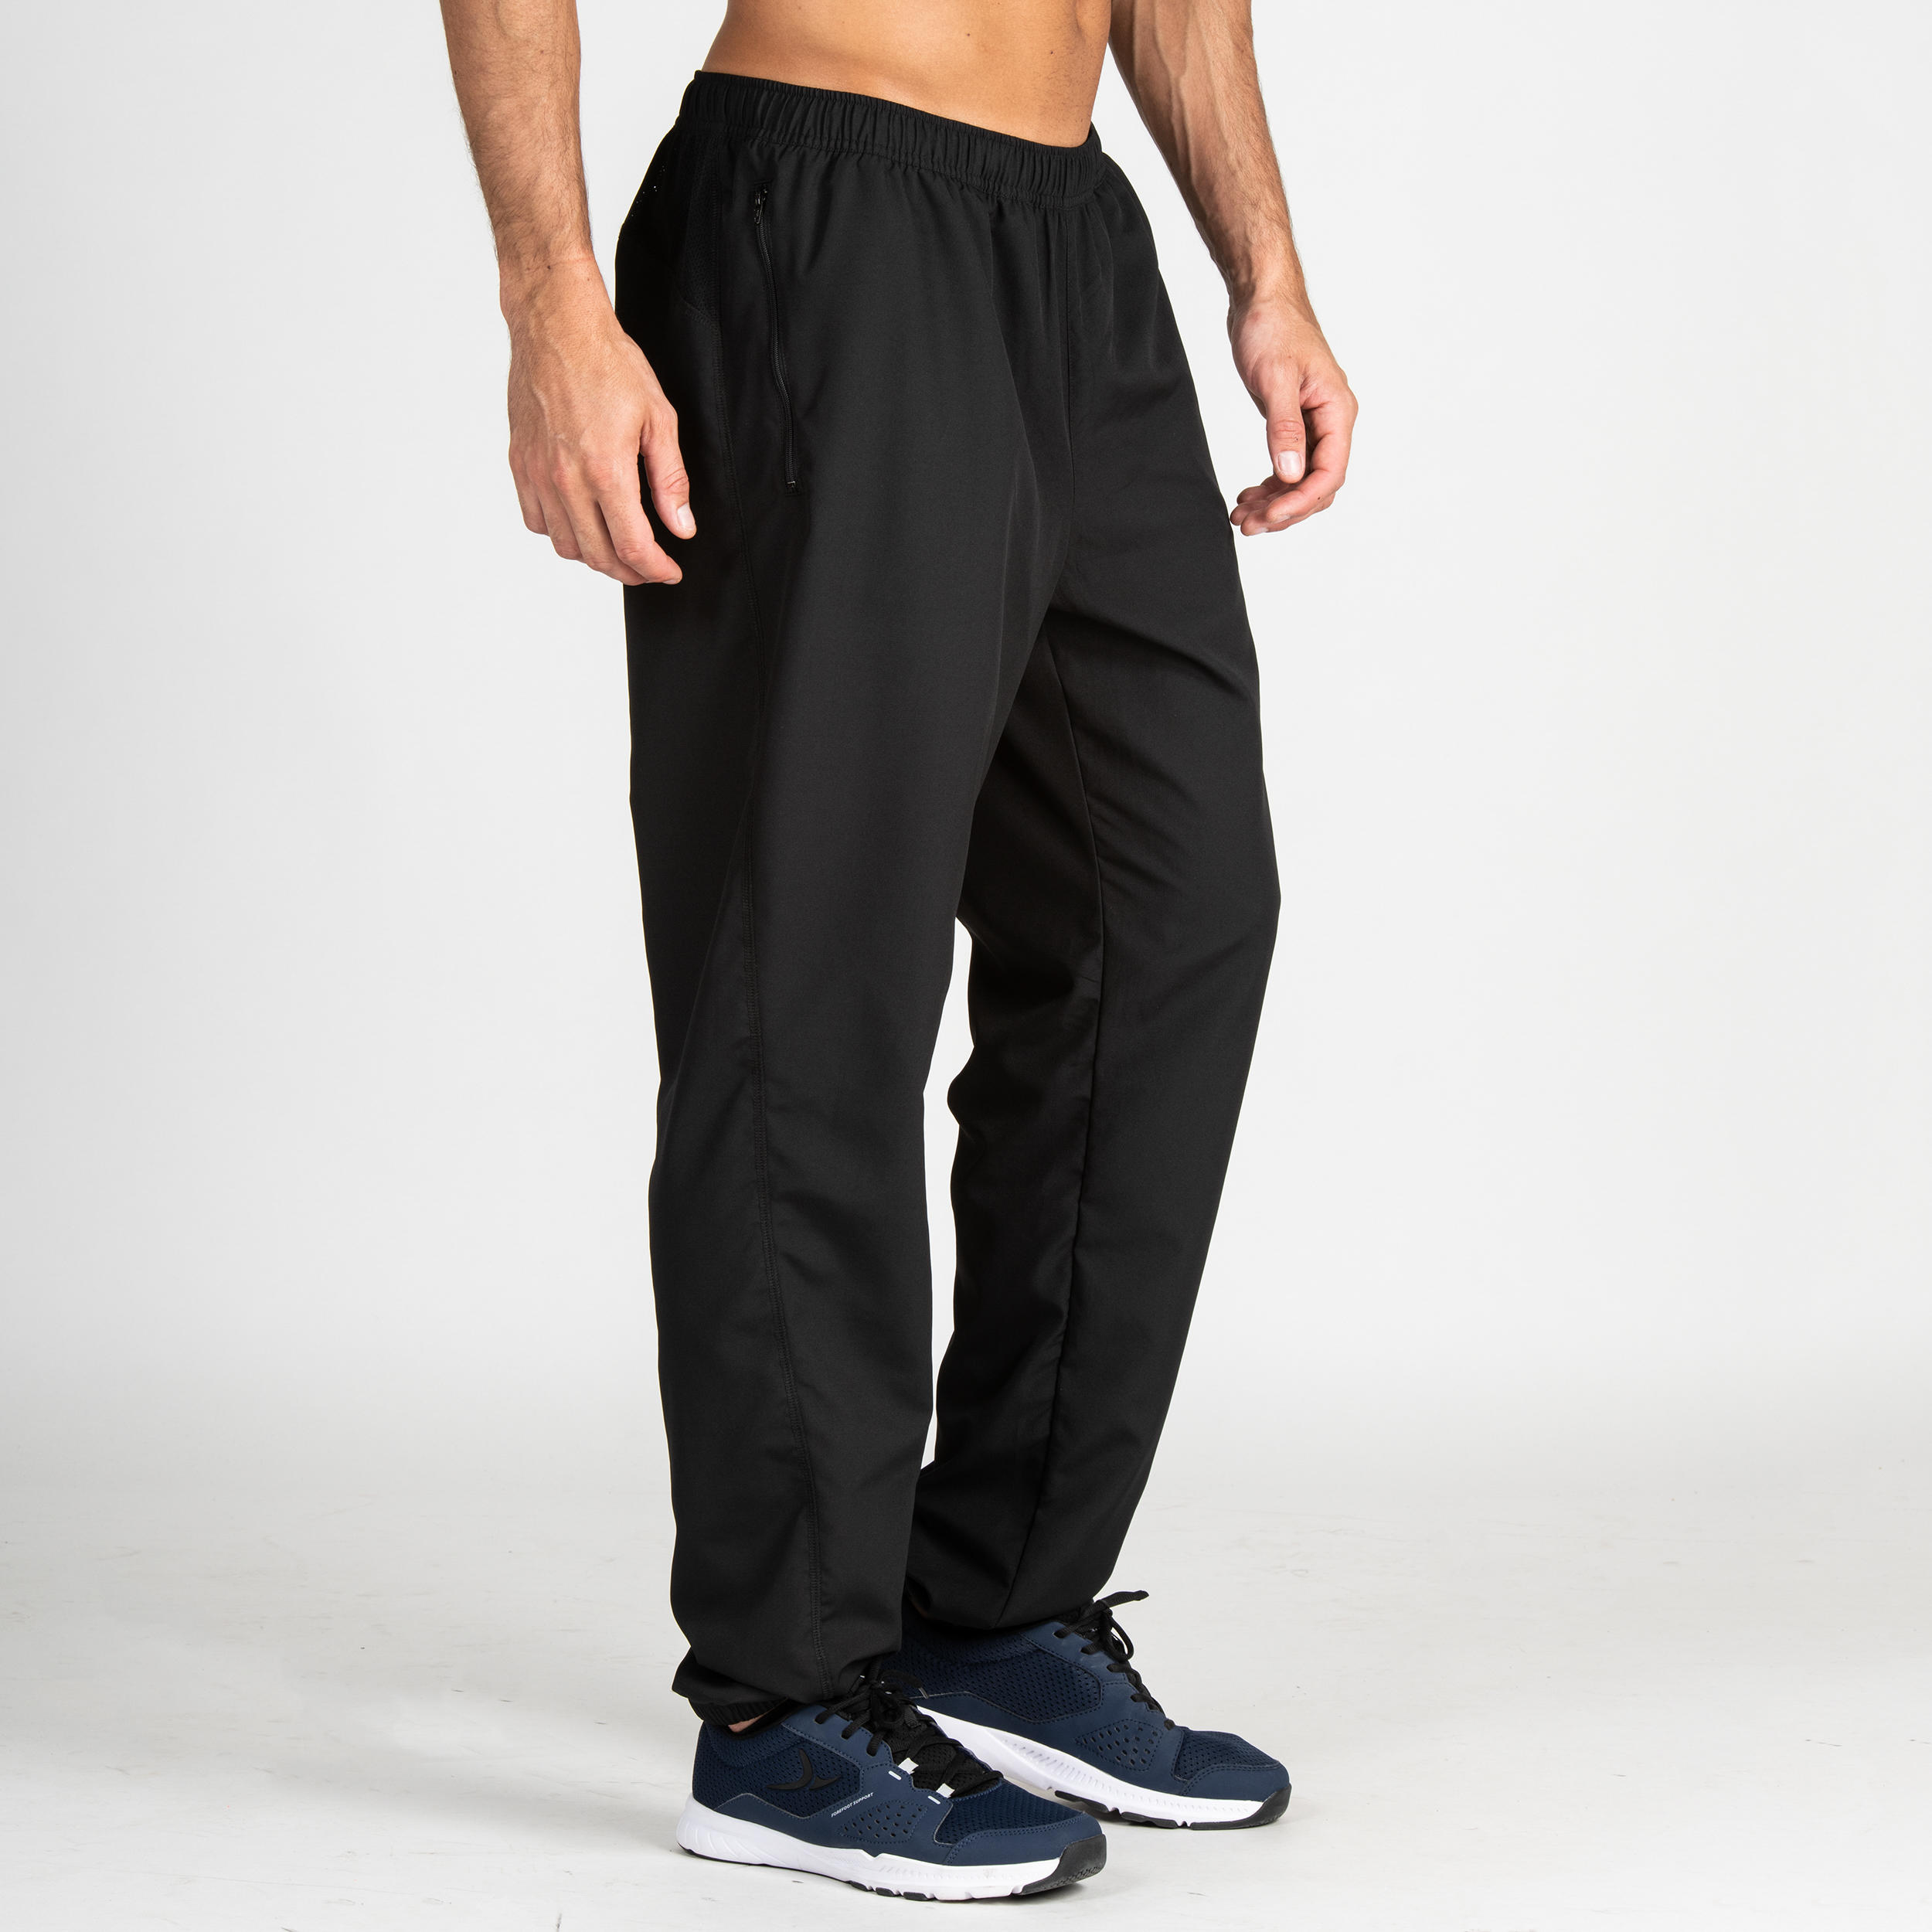 Men Dry 100 breathable running trousers - grey